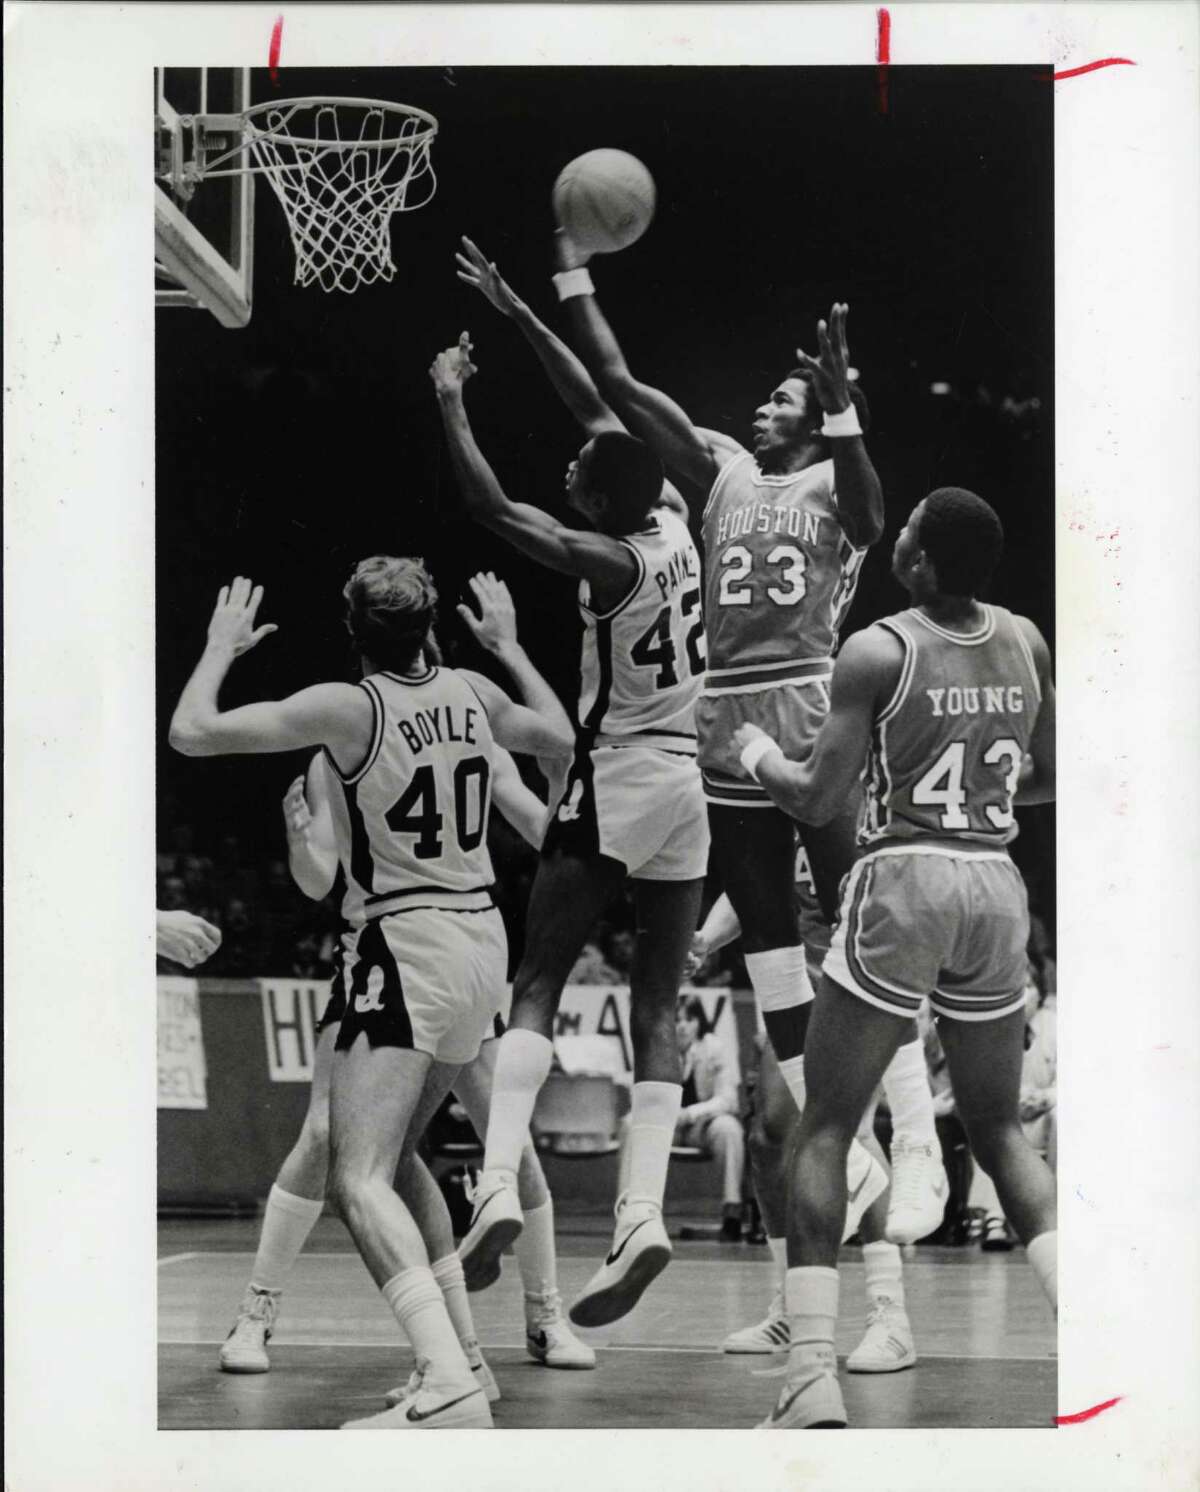 12/19/1981 - UH Cougars forward Clyde Drexler rebounds over Iowa at Hofheinz Pavilion. The Cougars went on to win over Iowa 62-52. HOUCHRON CAPTION (12/21/1981): Clyde Drexler (23) leaps over Iowa's Michael Payne to grab one of his 18 rebounds in the University of Houston Cougars' victory over fifth-ranked Iowa Saturday night.